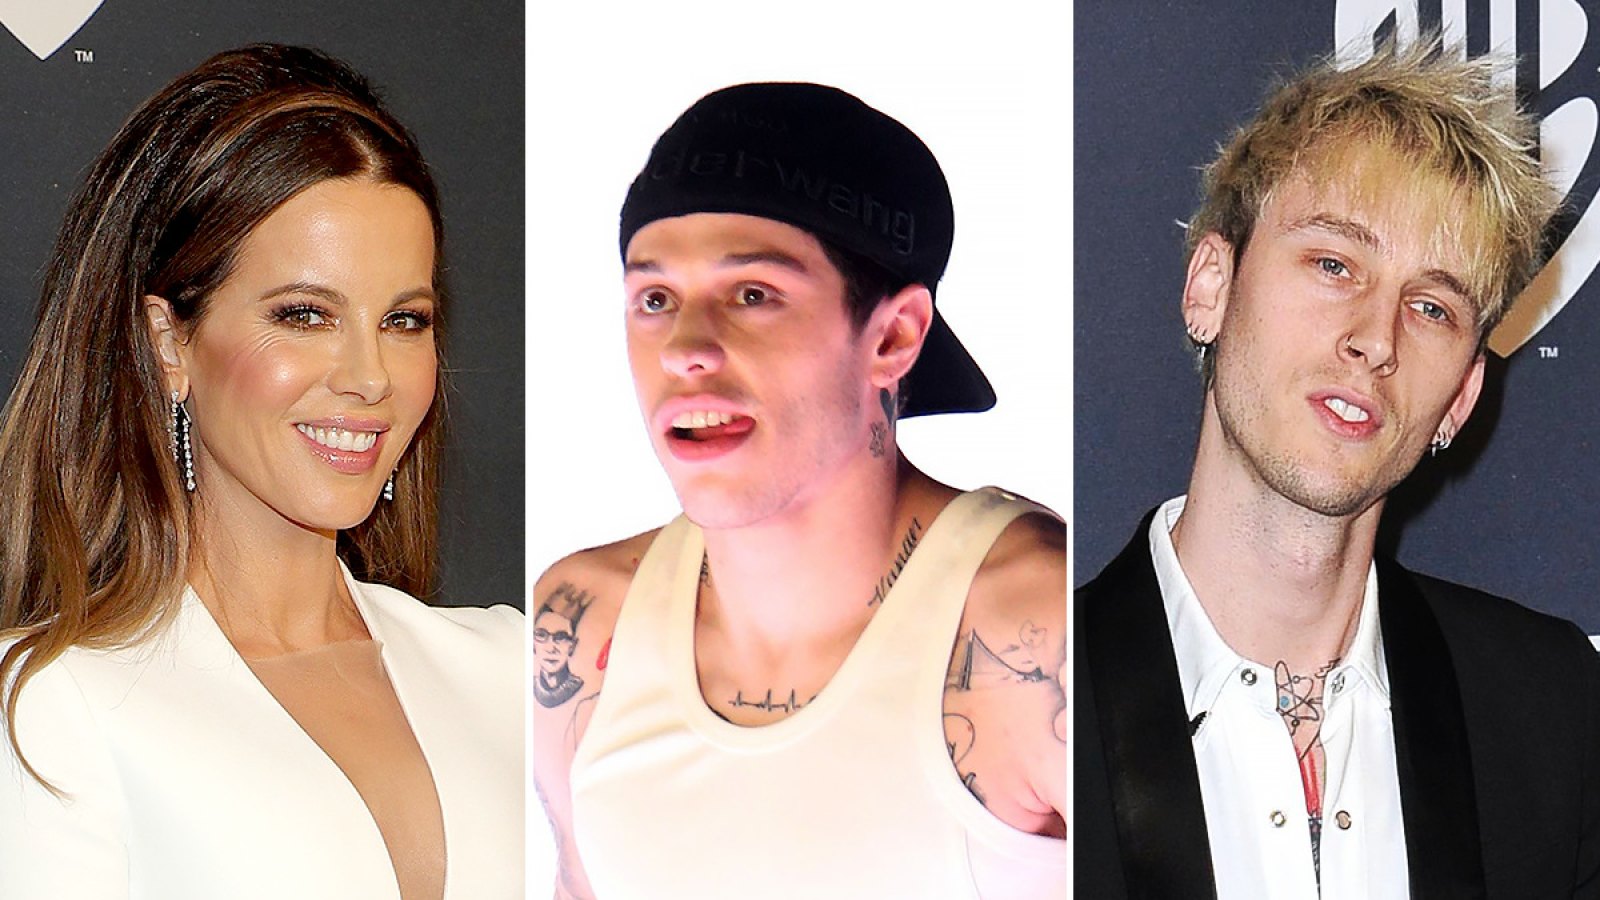 Kate Beckinsale Spotted at Party With Pete Davidson’s Pal Machine Gun Kelly